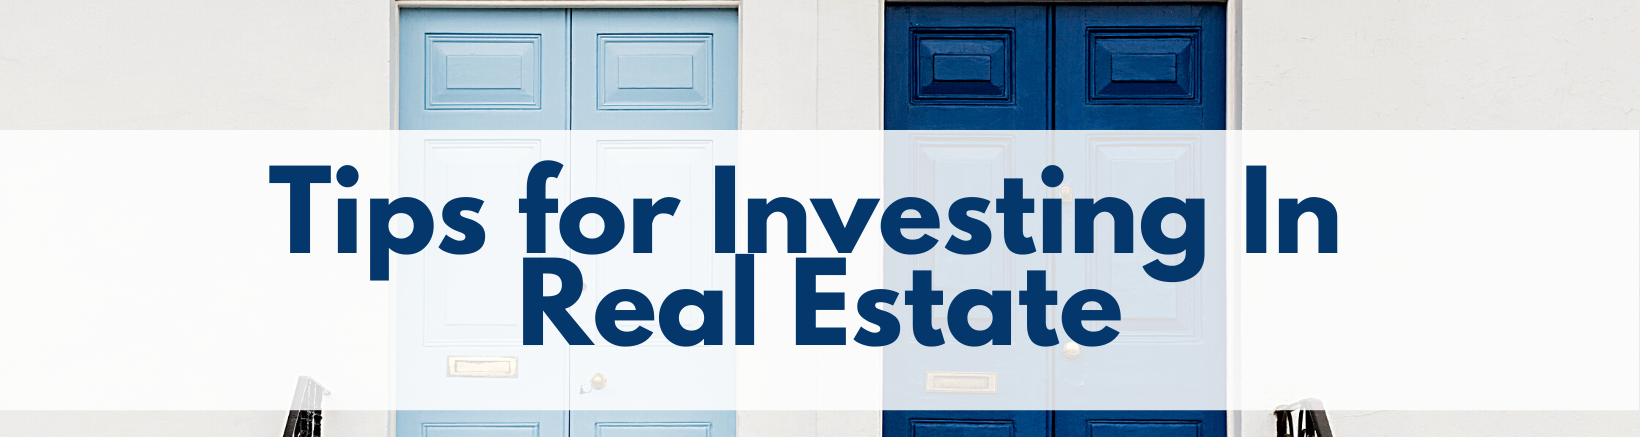 Tips for Investing In Real Estate